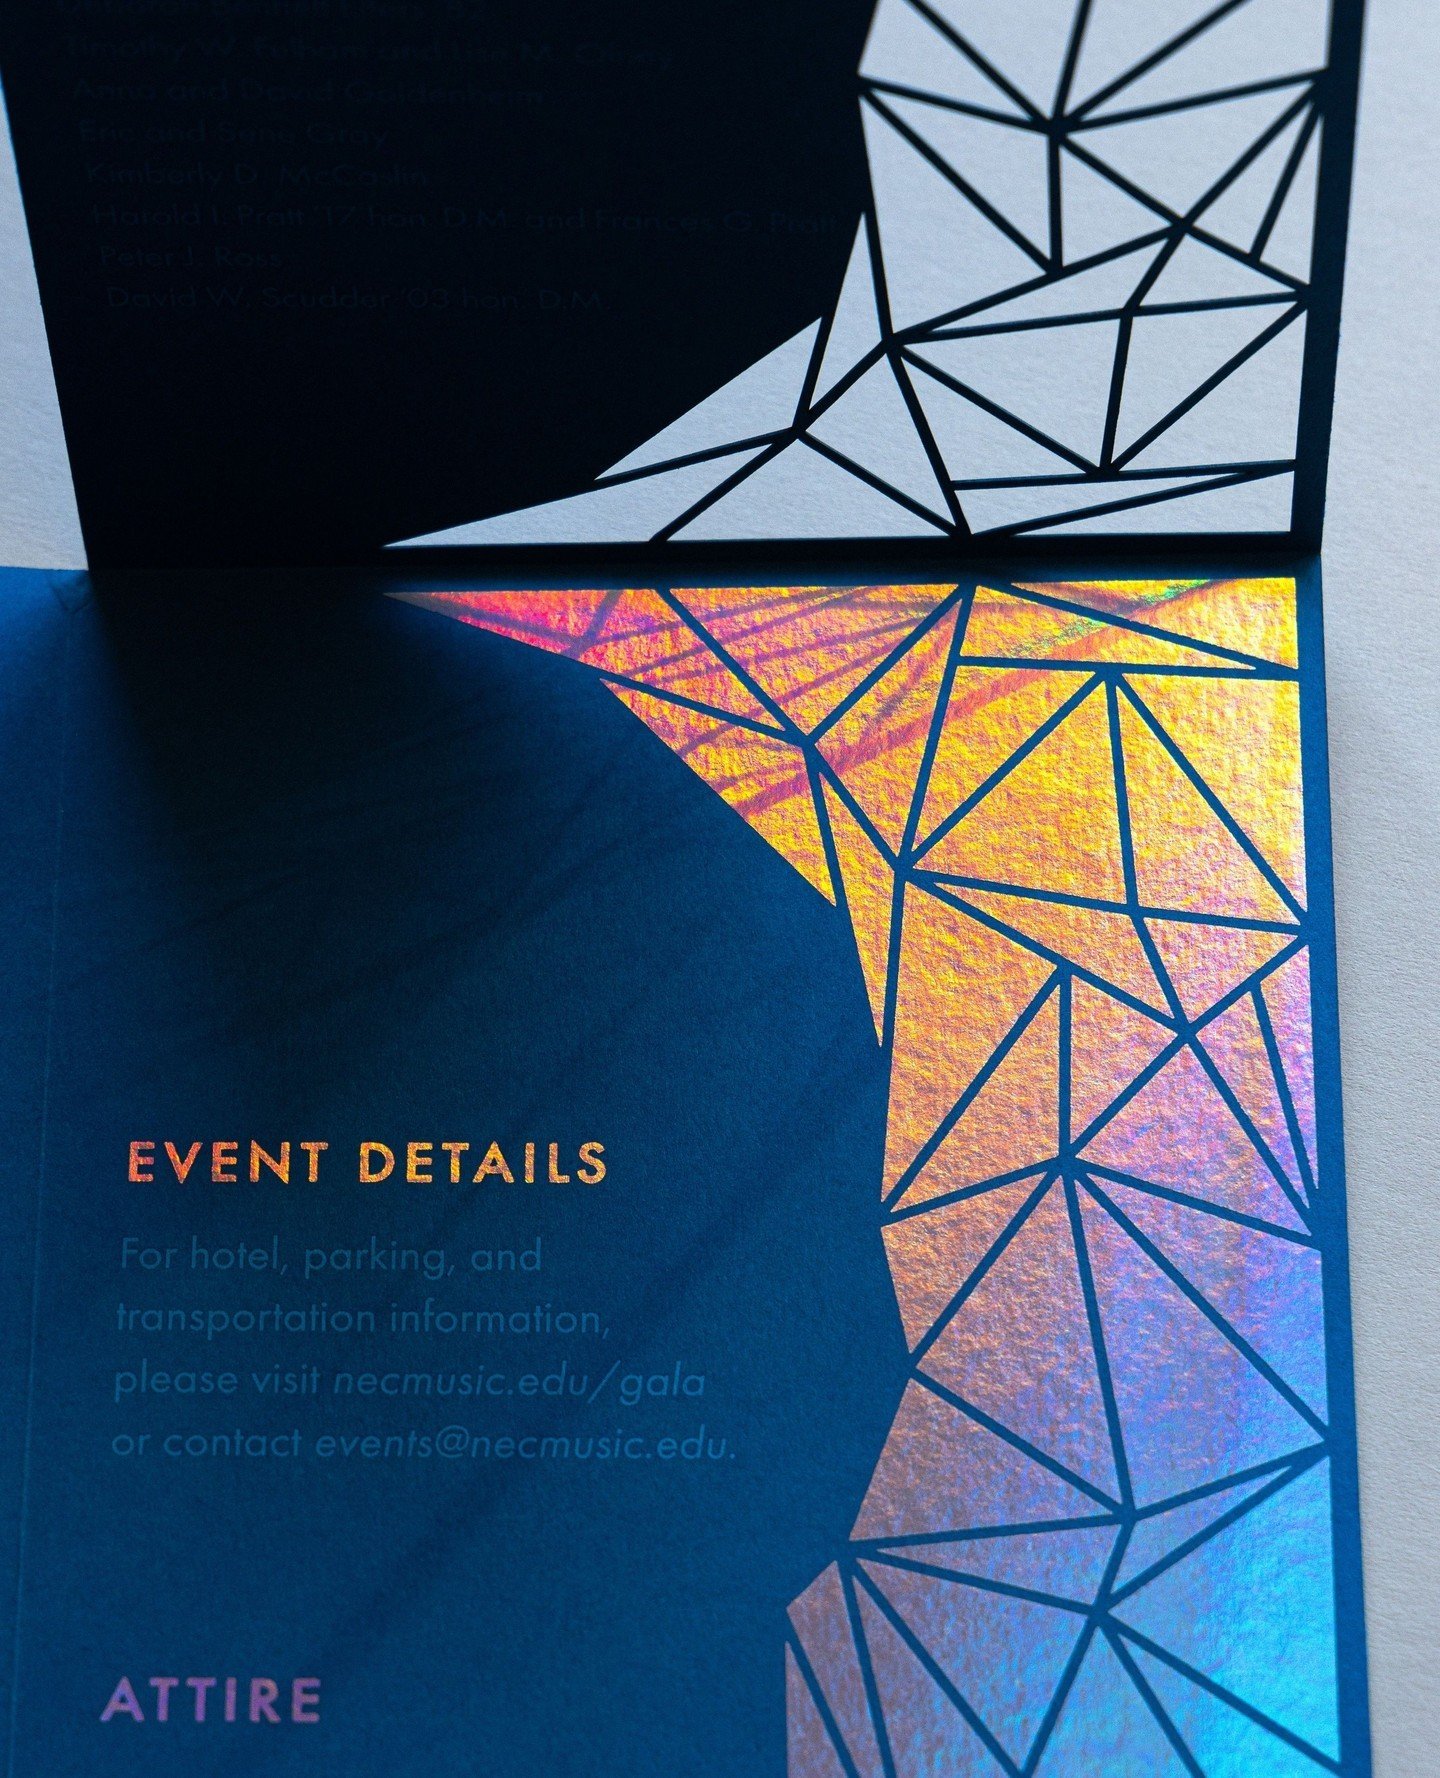 Holographic foil and laser cut invitation for this year's New England Conservatory gala to raise money for the scholarship fund. Loving the handsome colors and interesting shapes #katiefischerdesign Photo by @rwagnerphotography